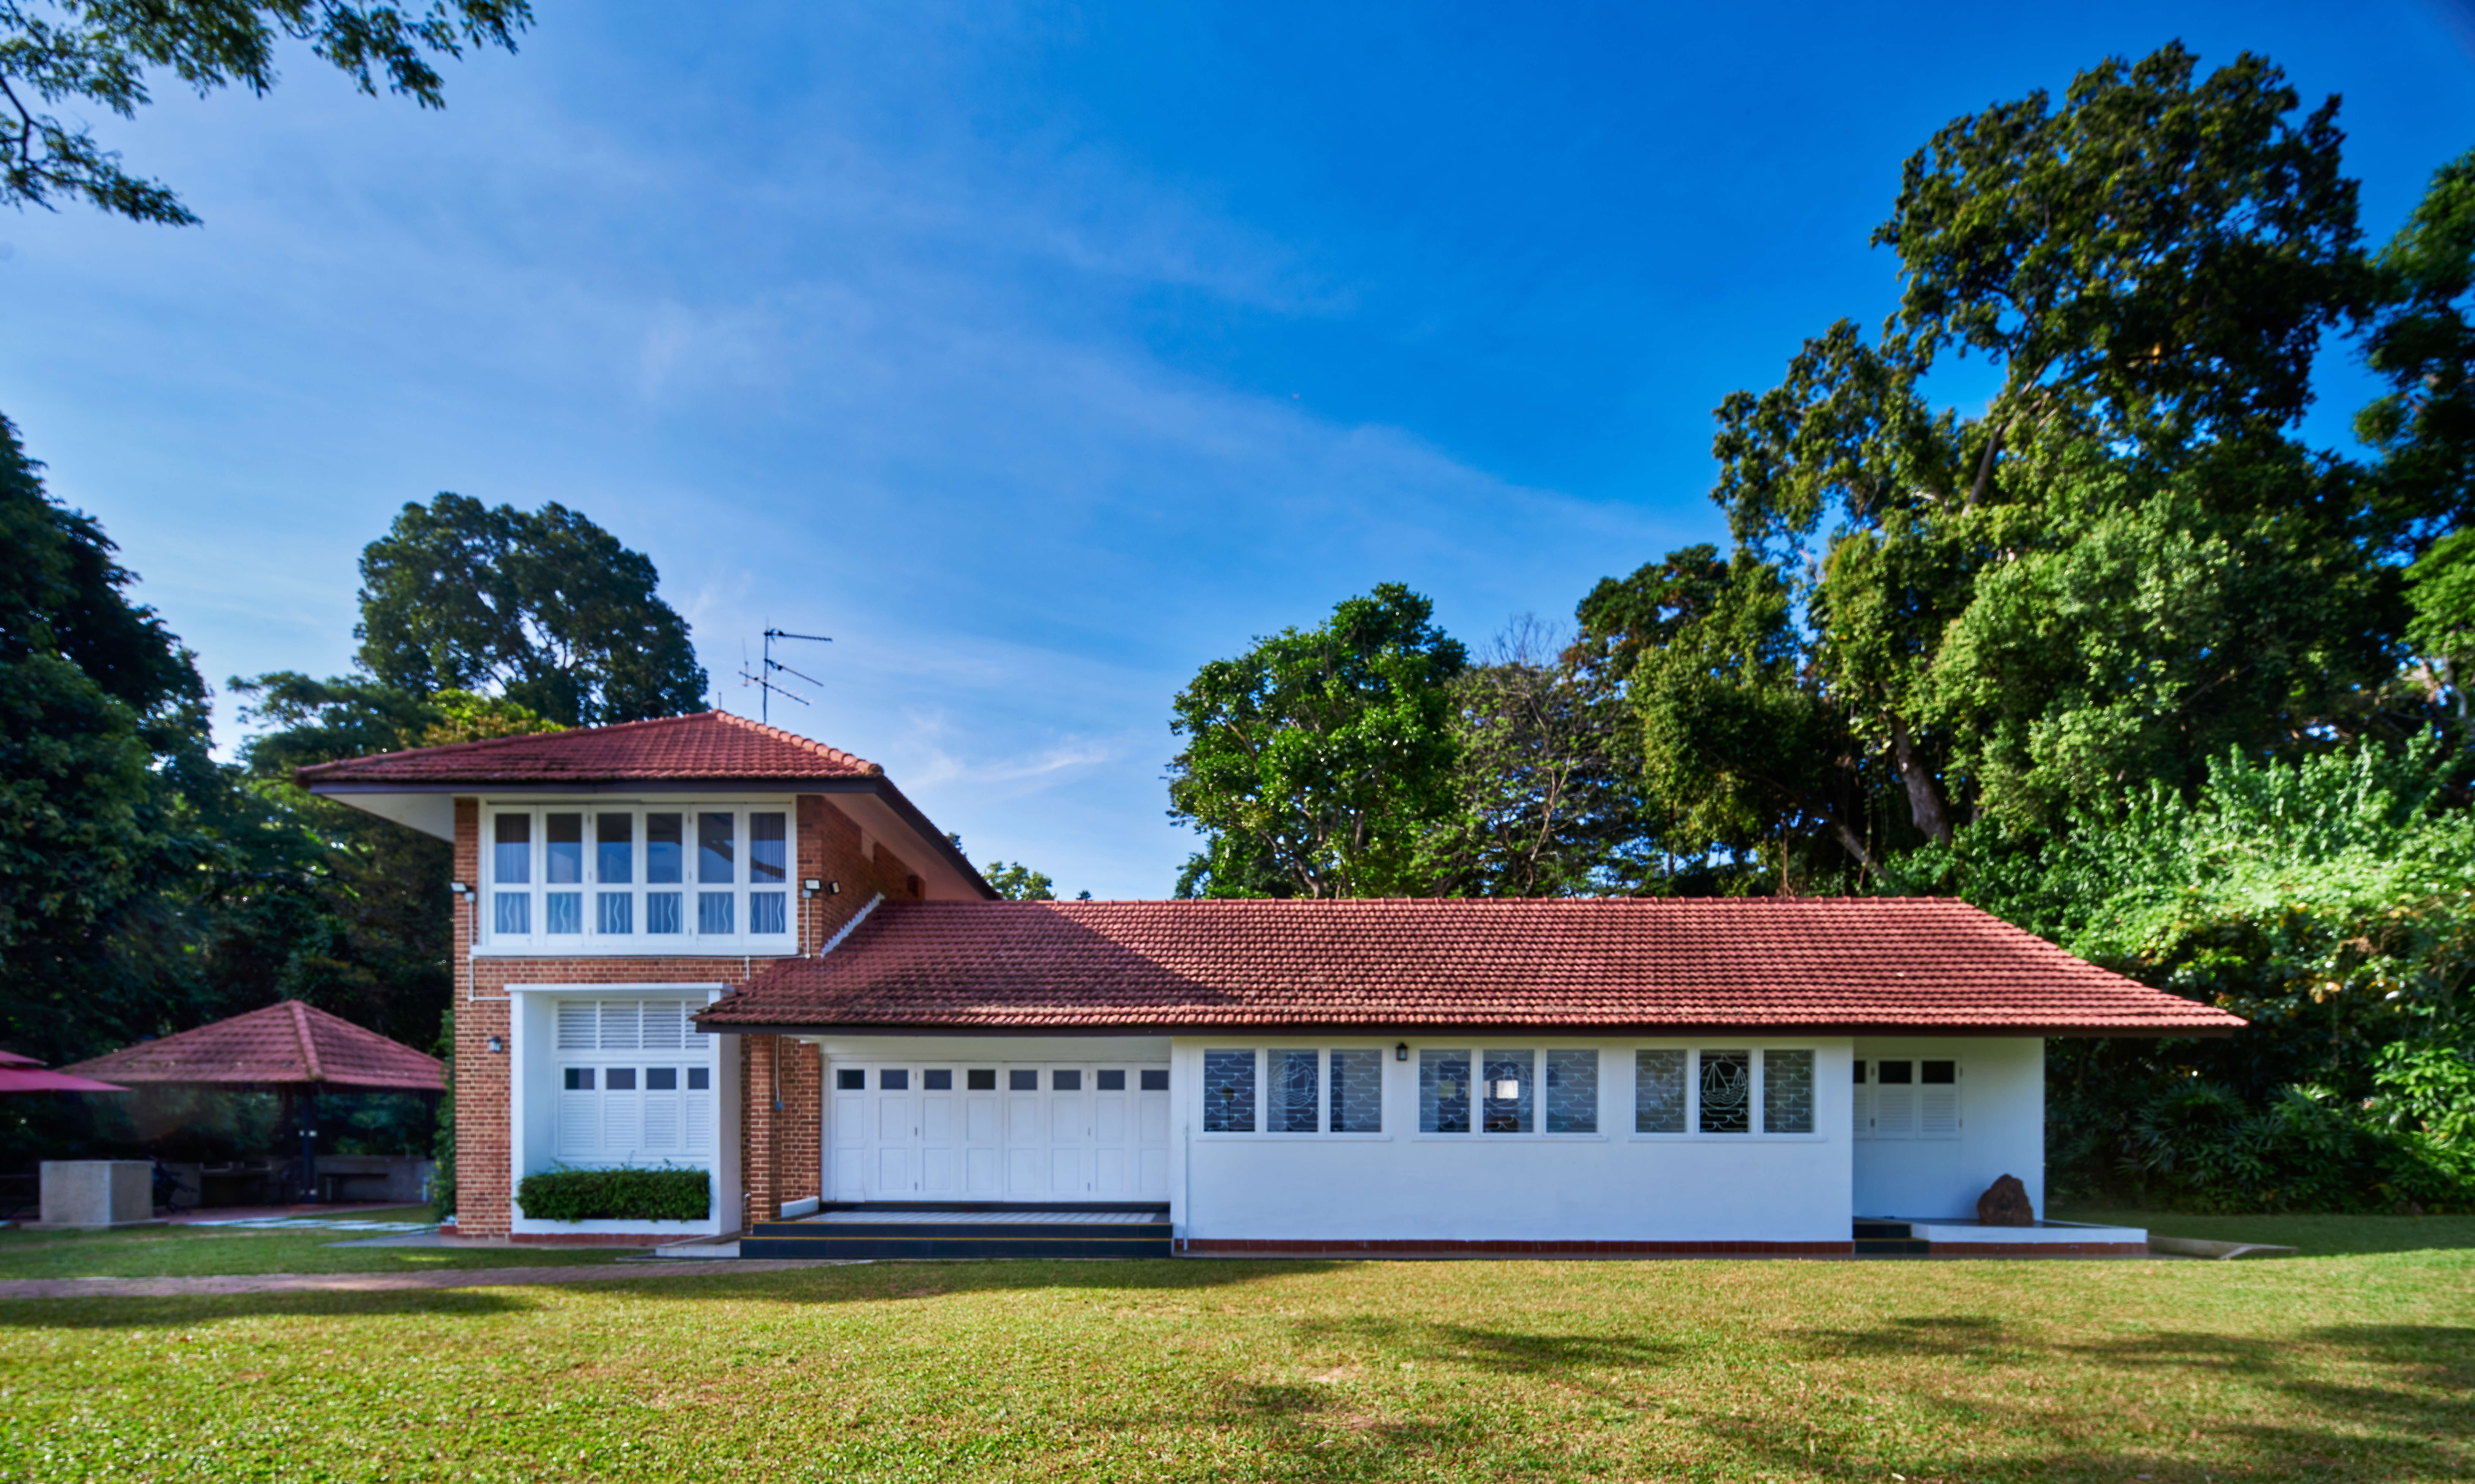 Built in 1950, Changi Cottage is well-known as the location where Singapore’s founding Prime Minister Lee Kuan Yew recuperated and worked after the tumult of Singapore’s independence in 1965. The Cottage is now part of the CSC@Changi resort and can be rented by the public.